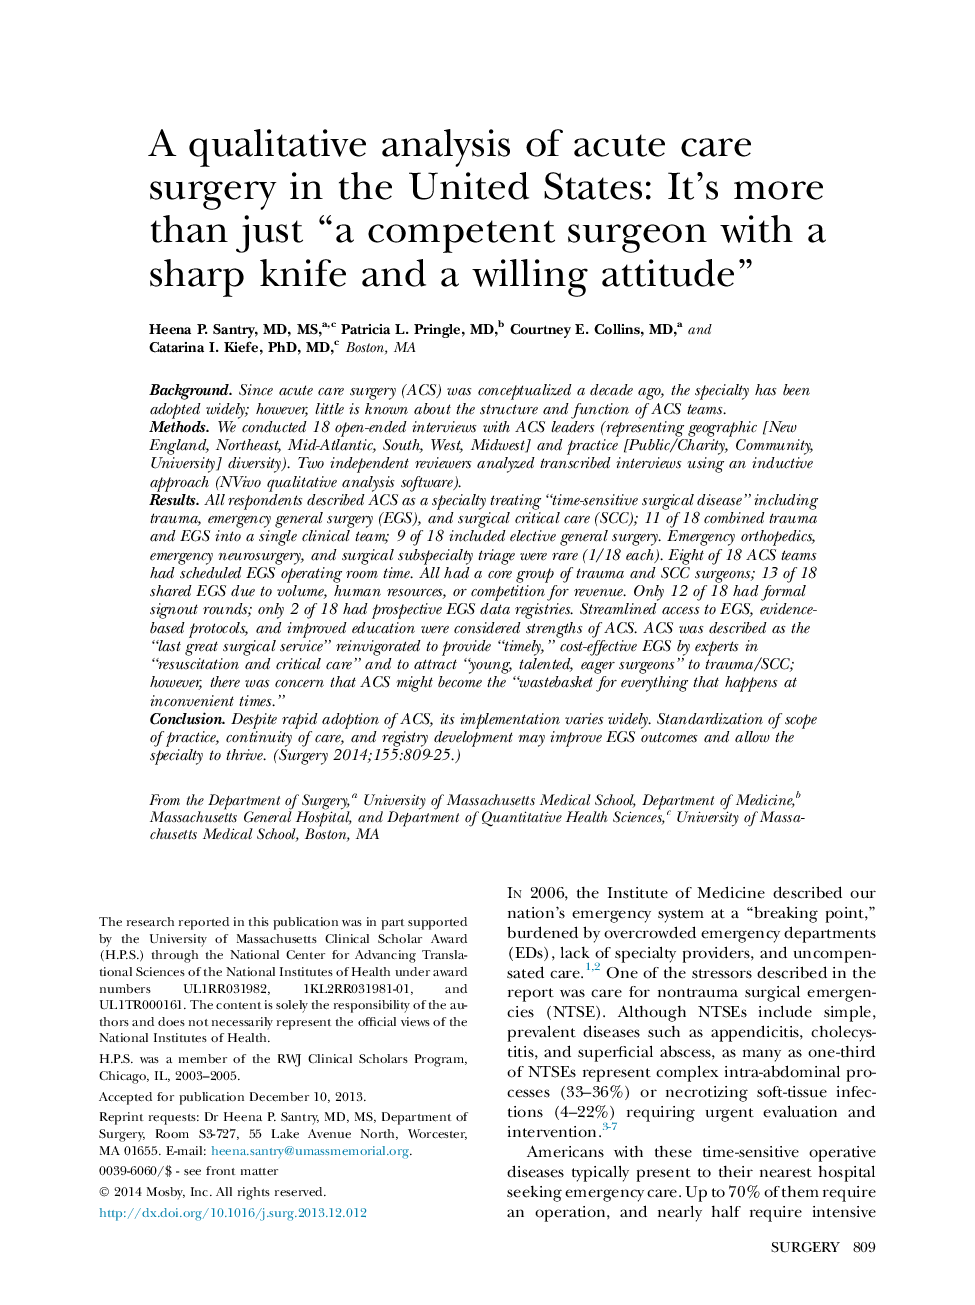 A qualitative analysis of acute care surgery in the United States: It's more than just “a competent surgeon with a sharp knife and a willing attitude” 